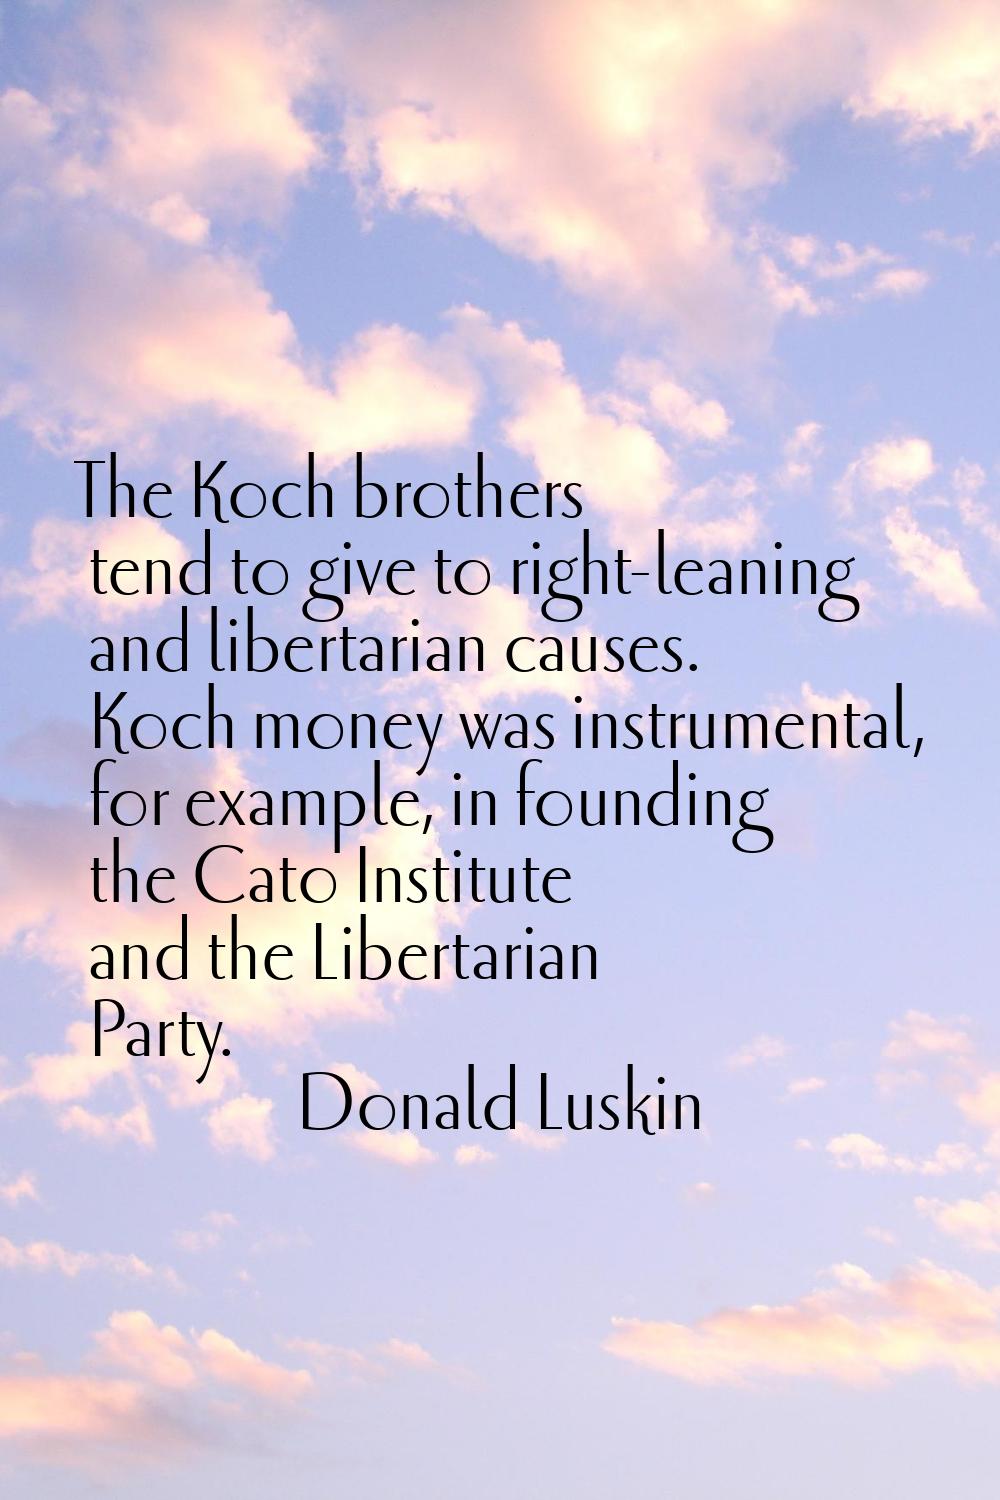 The Koch brothers tend to give to right-leaning and libertarian causes. Koch money was instrumental